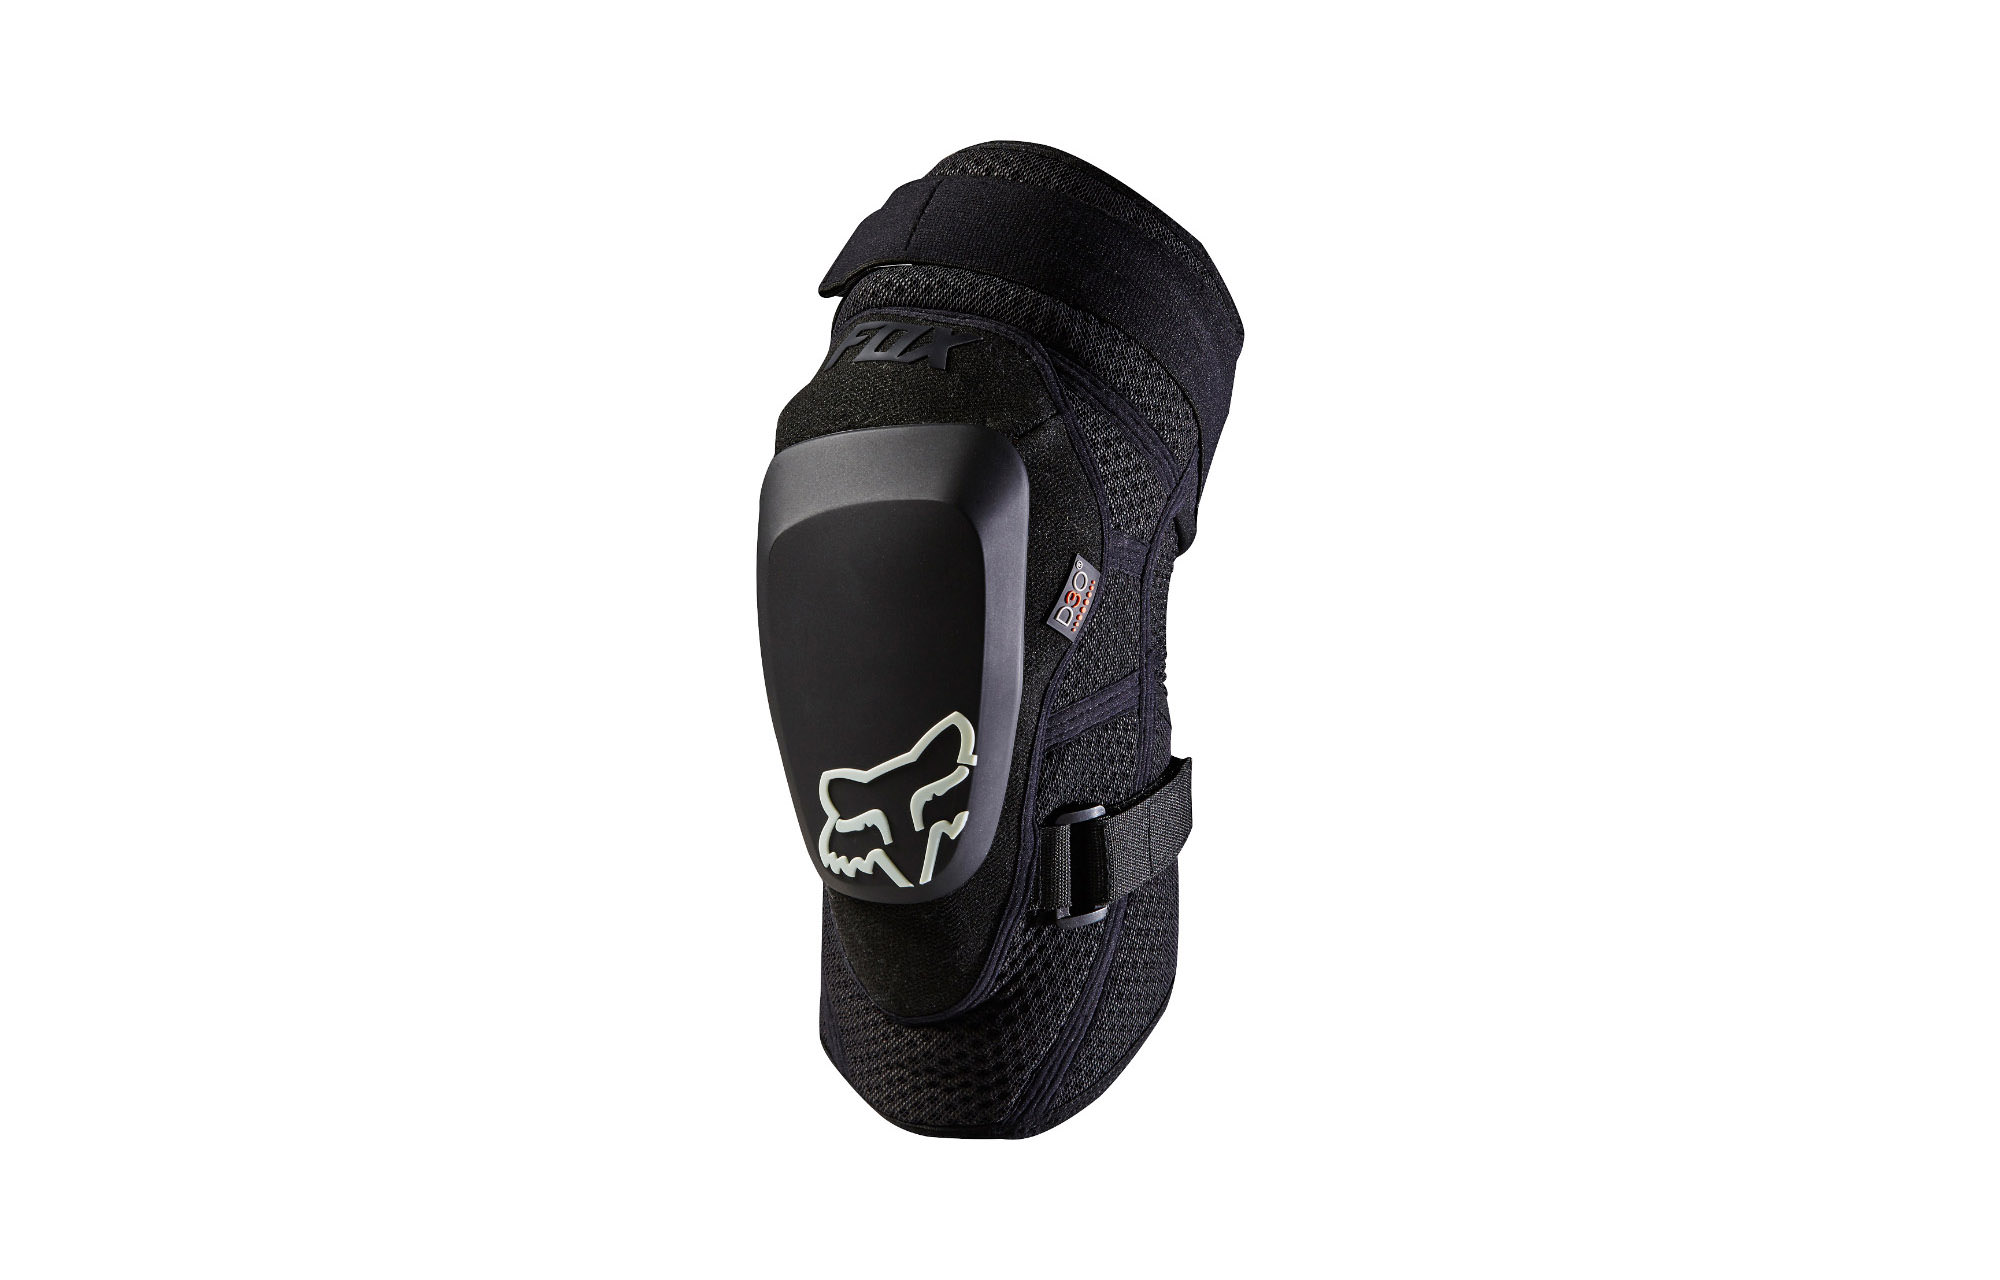 FOX LAUNCH PRO D3O KNEE GUARD image number 0